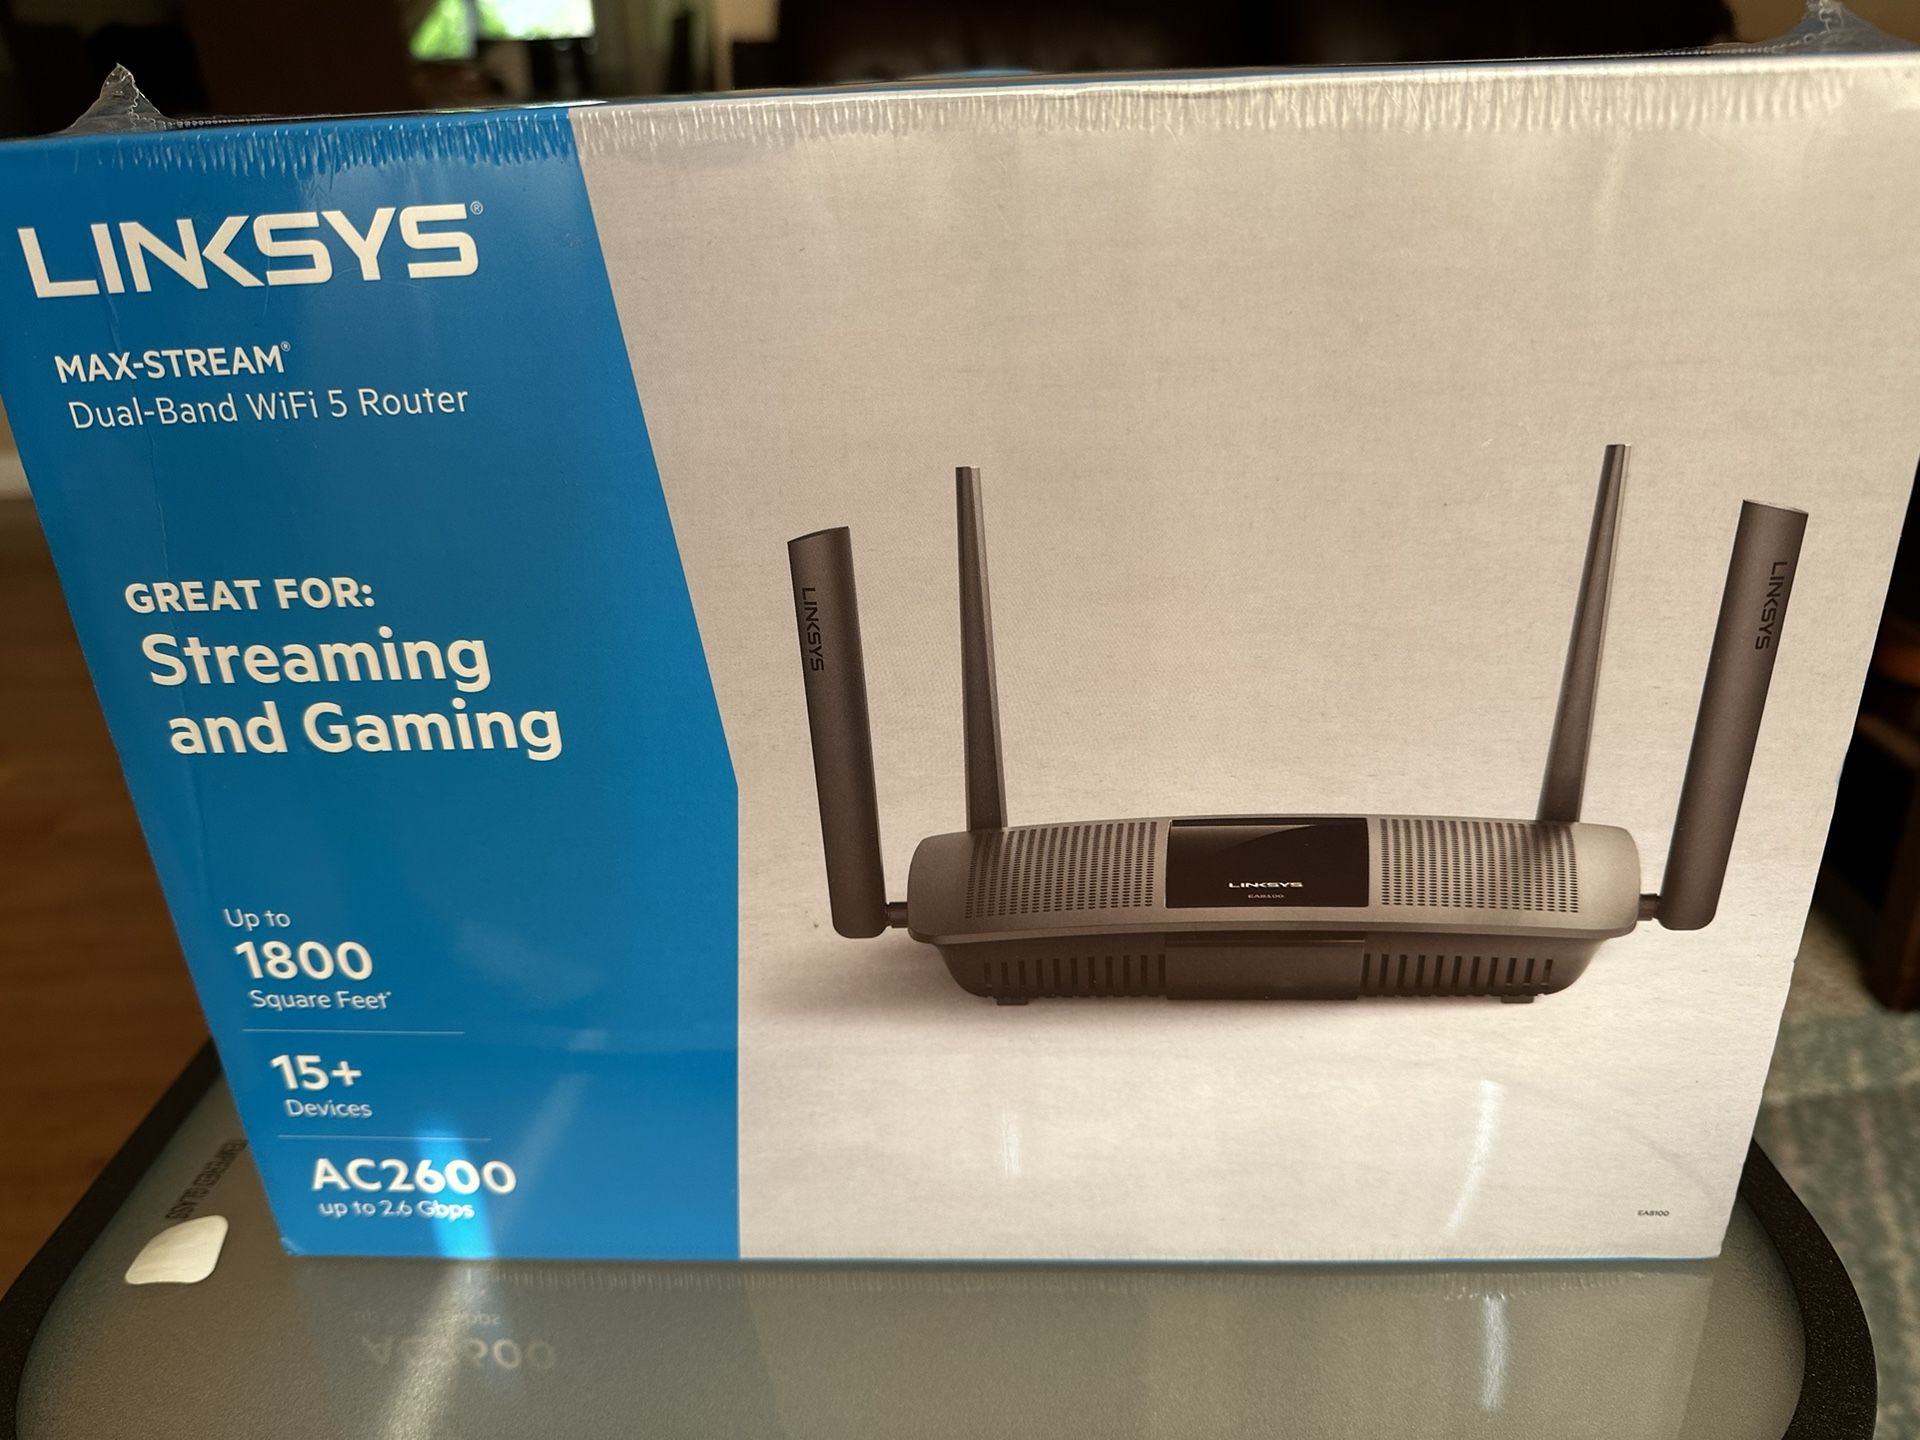 Linksys AC2600 - Max-Stream Router